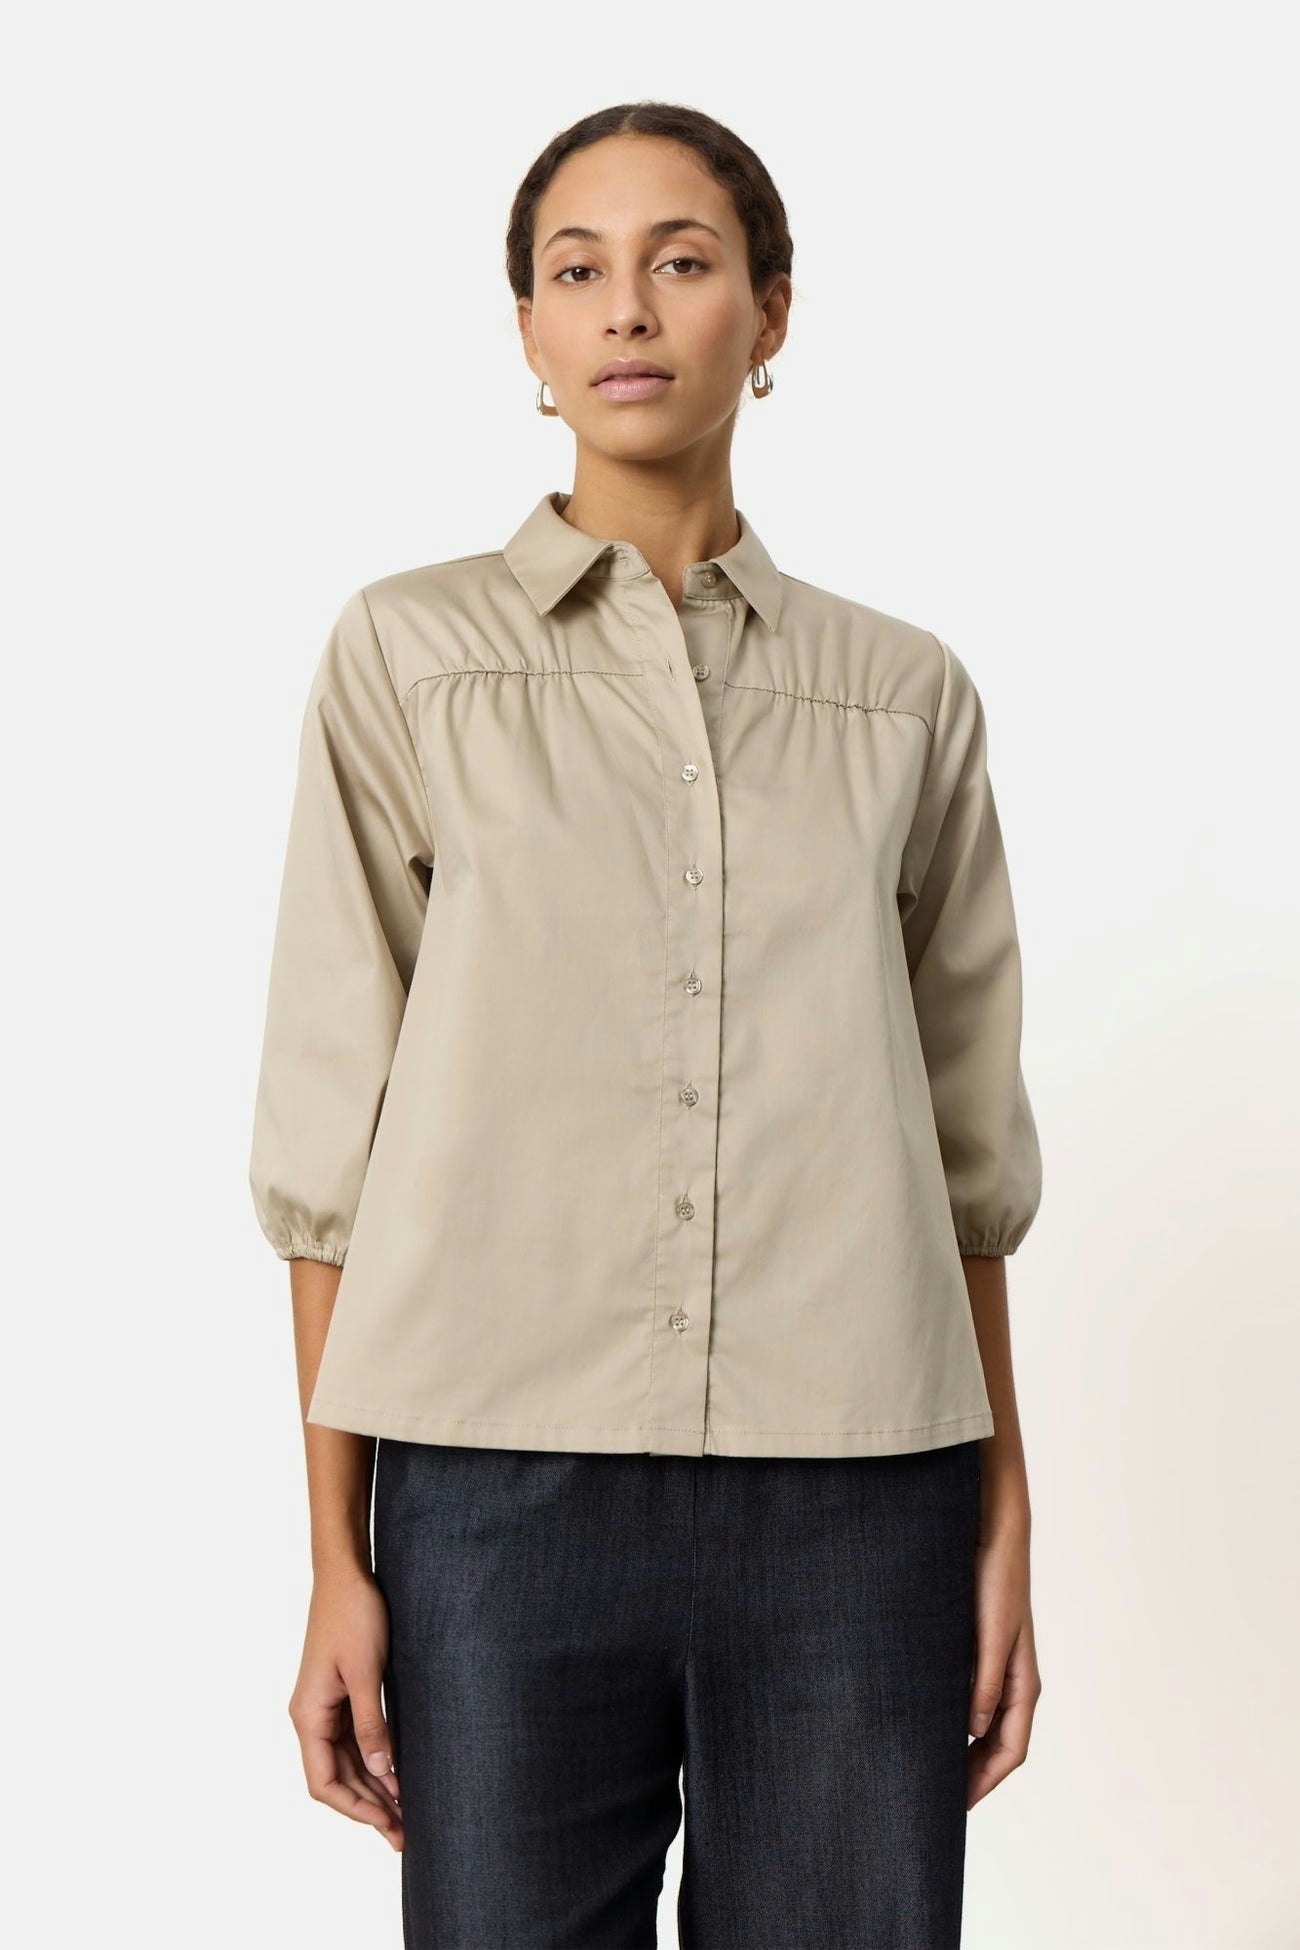 LR-Isla Solid Shirt 102 Plaza Taupe Levete Room